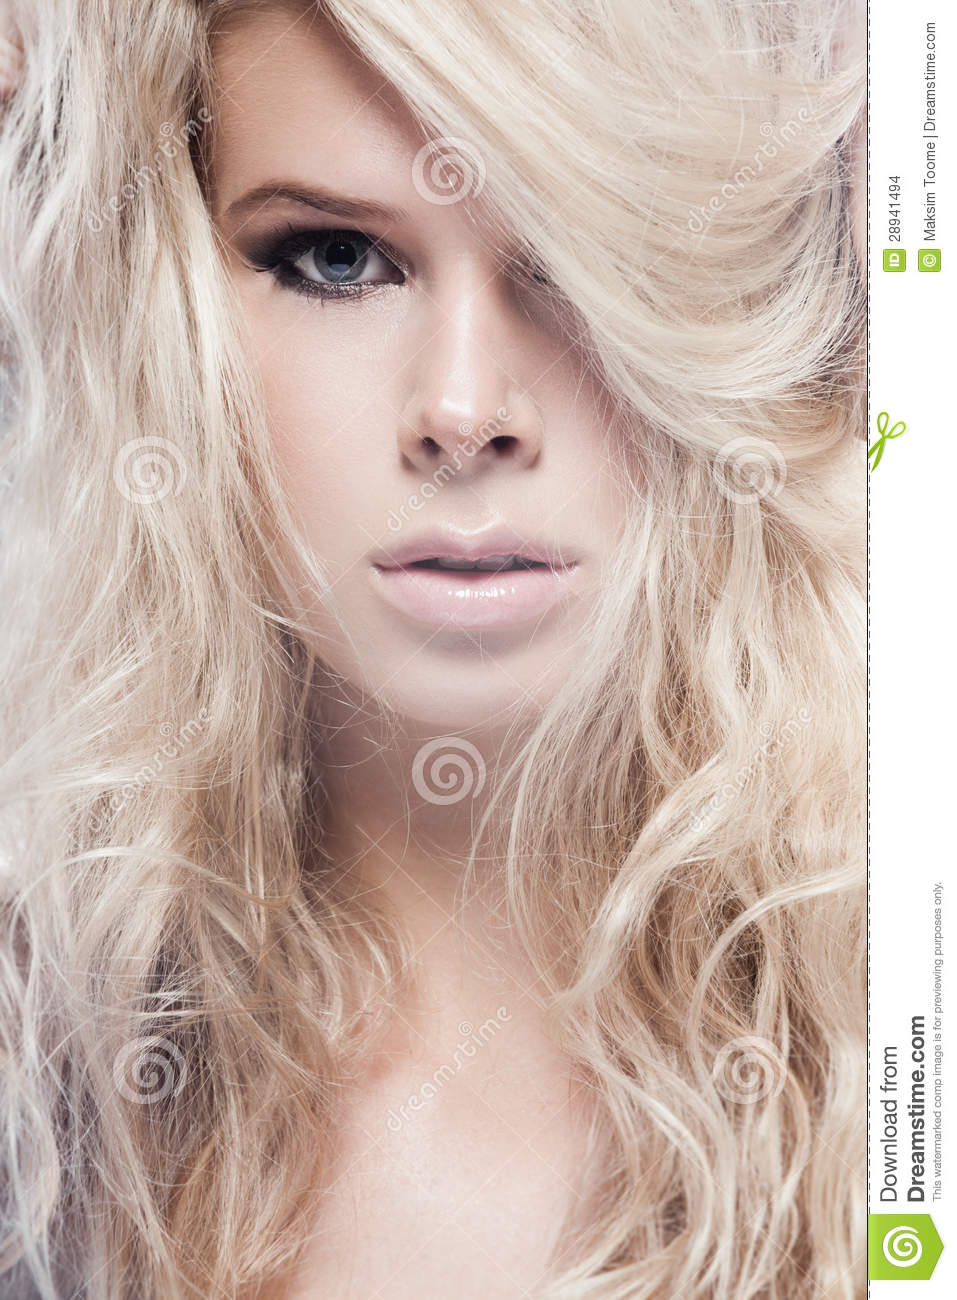 Tangled Hair Stock Images   Image  28941494